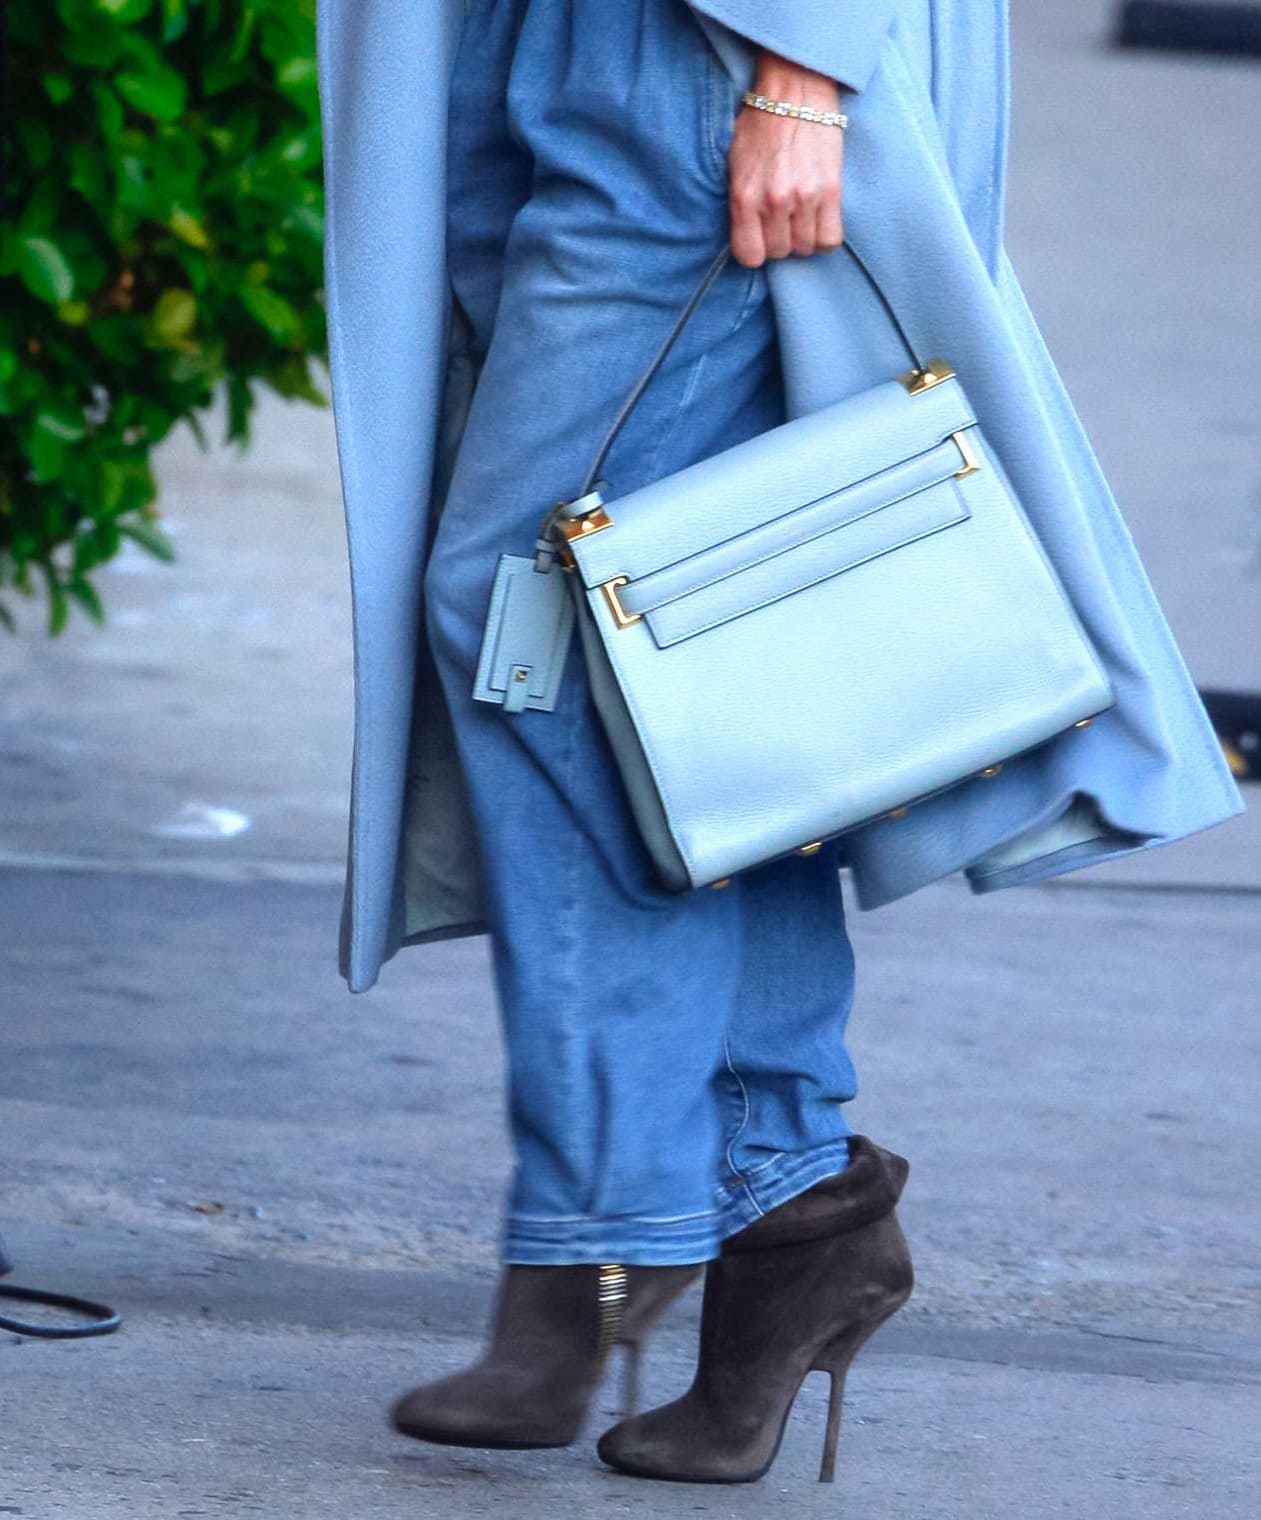 Jennifer Lopez keeps a coordinated look with a blue Valentino bag and a pair of gray suede Giuseppe Zanotti boots